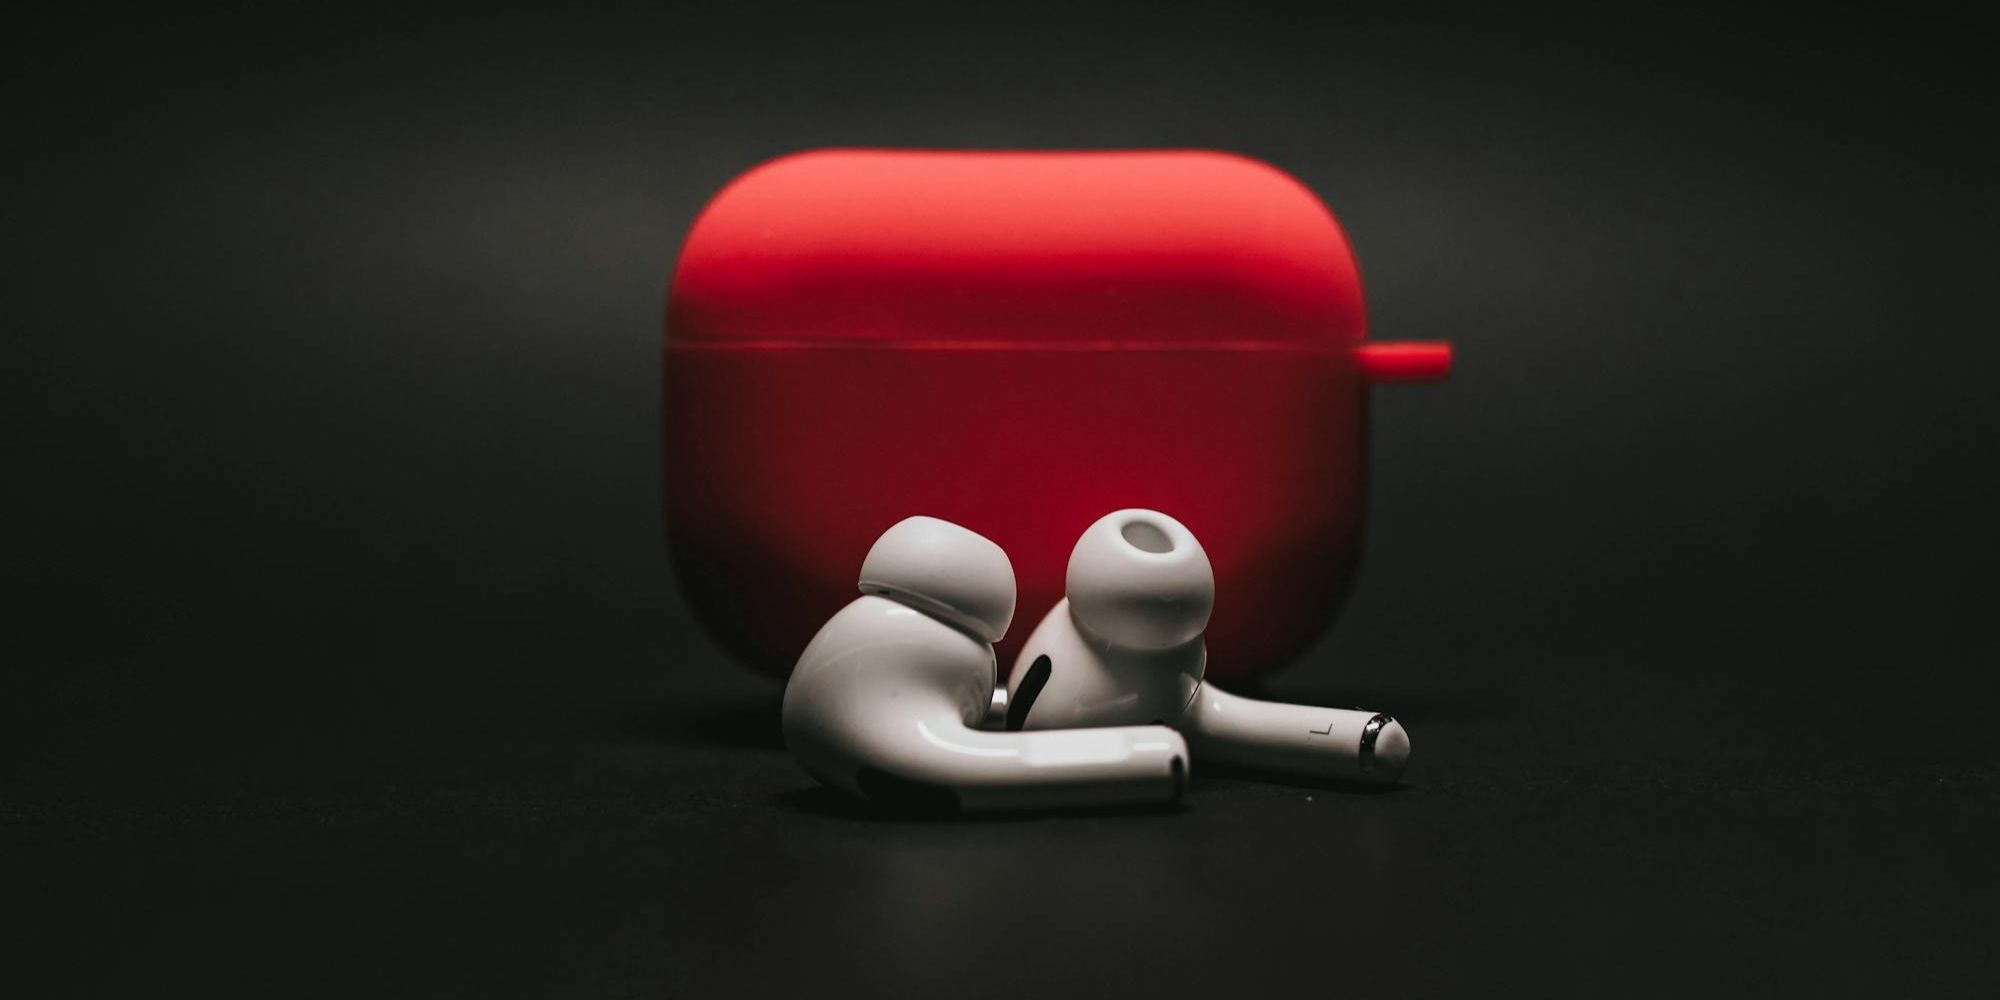 Two AirPods Black Background With Red Case